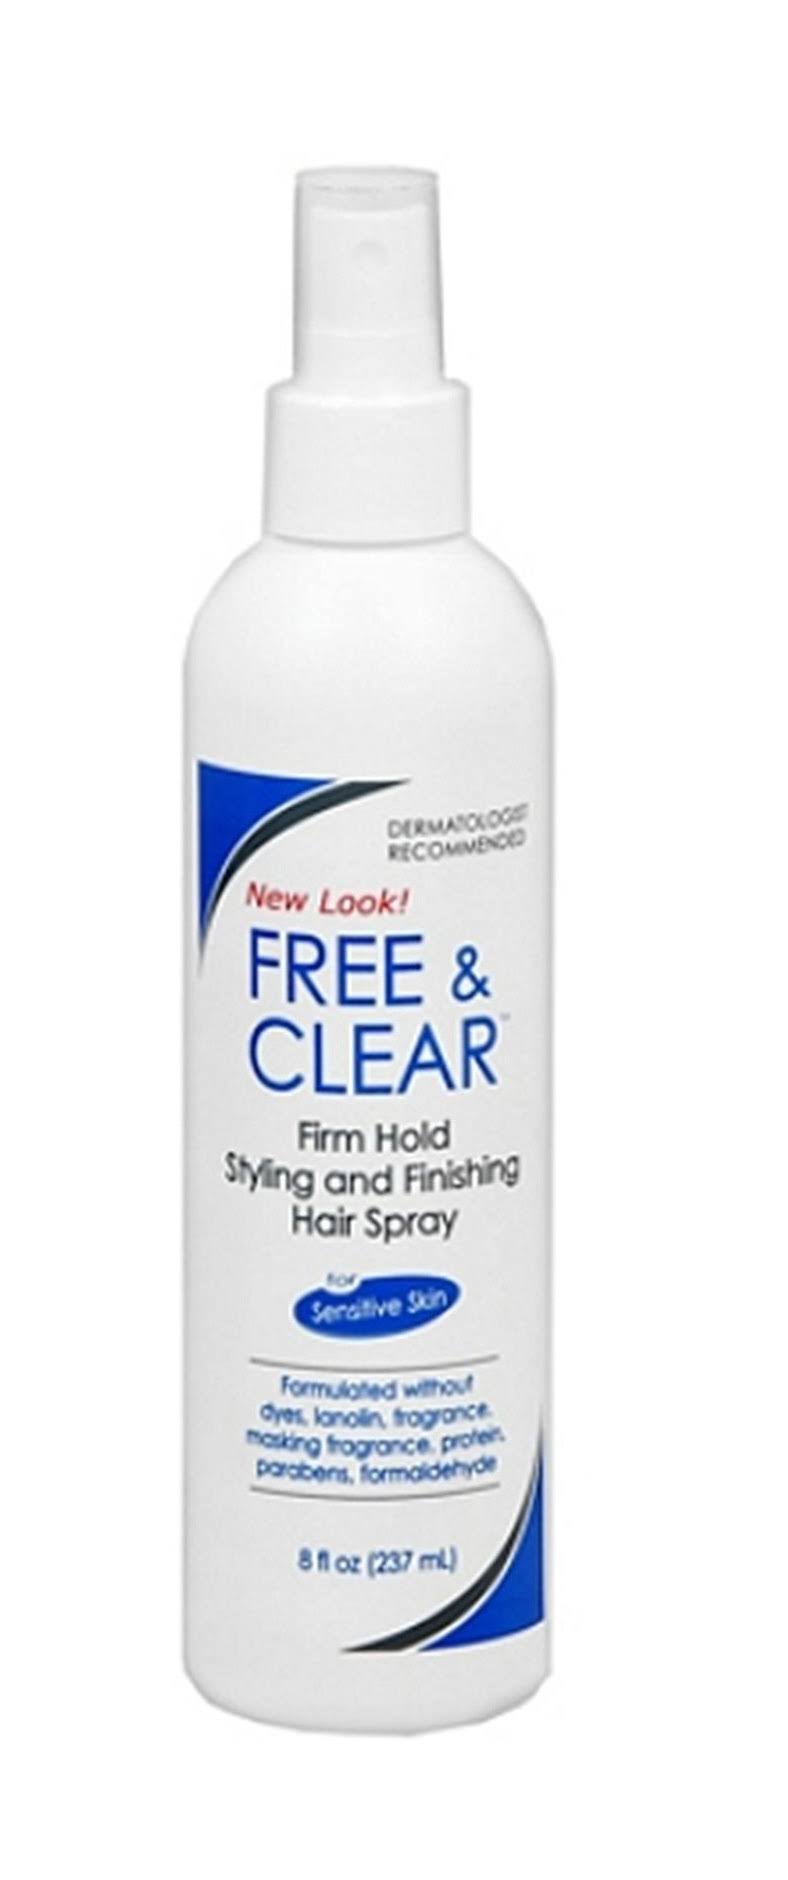 Free and Clear Styling and Finishing Hair Spray - Firm Hold, 8oz